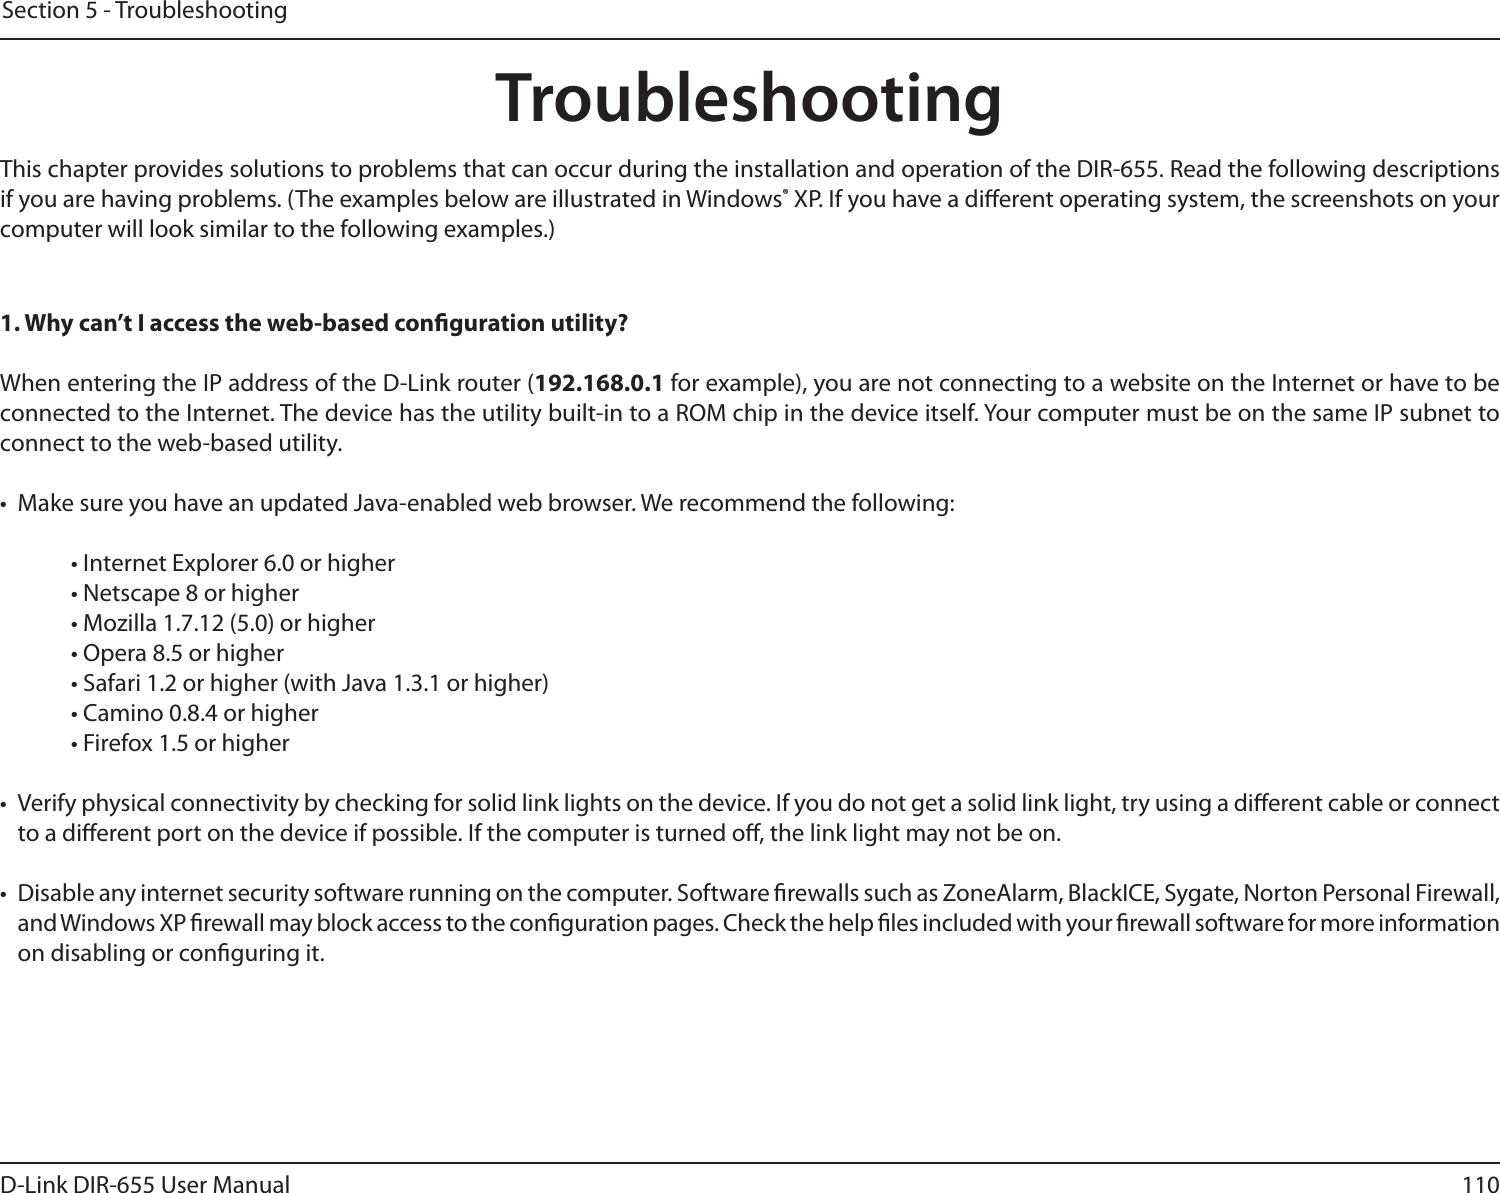 110D-Link DIR-655 User ManualSection 5 - TroubleshootingTroubleshootingThis chapter provides solutions to problems that can occur during the installation and operation of the DIR-655. Read the following descriptions if you are having problems. (The examples below are illustrated in Windows® XP. If you have a dierent operating system, the screenshots on your computer will look similar to the following examples.)1. Why can’t I access the web-based conguration utility?When entering the IP address of the D-Link router (192.168.0.1 for example), you are not connecting to a website on the Internet or have to be connected to the Internet. The device has the utility built-in to a ROM chip in the device itself. Your computer must be on the same IP subnet to connect to the web-based utility. •  Make sure you have an updated Java-enabled web browser. We recommend the following: • Internet Explorer 6.0 or higher • Netscape 8 or higher • Mozilla 1.7.12 (5.0) or higher • Opera 8.5 or higher • Safari 1.2 or higher (with Java 1.3.1 or higher) • Camino 0.8.4 or higher • Firefox 1.5 or higher •  Verify physical connectivity by checking for solid link lights on the device. If you do not get a solid link light, try using a dierent cable or connect to a dierent port on the device if possible. If the computer is turned o, the link light may not be on.•  Disable any internet security software running on the computer. Software rewalls such as ZoneAlarm, BlackICE, Sygate, Norton Personal Firewall, and Windows XP rewall may block access to the conguration pages. Check the help les included with your rewall software for more information on disabling or conguring it.